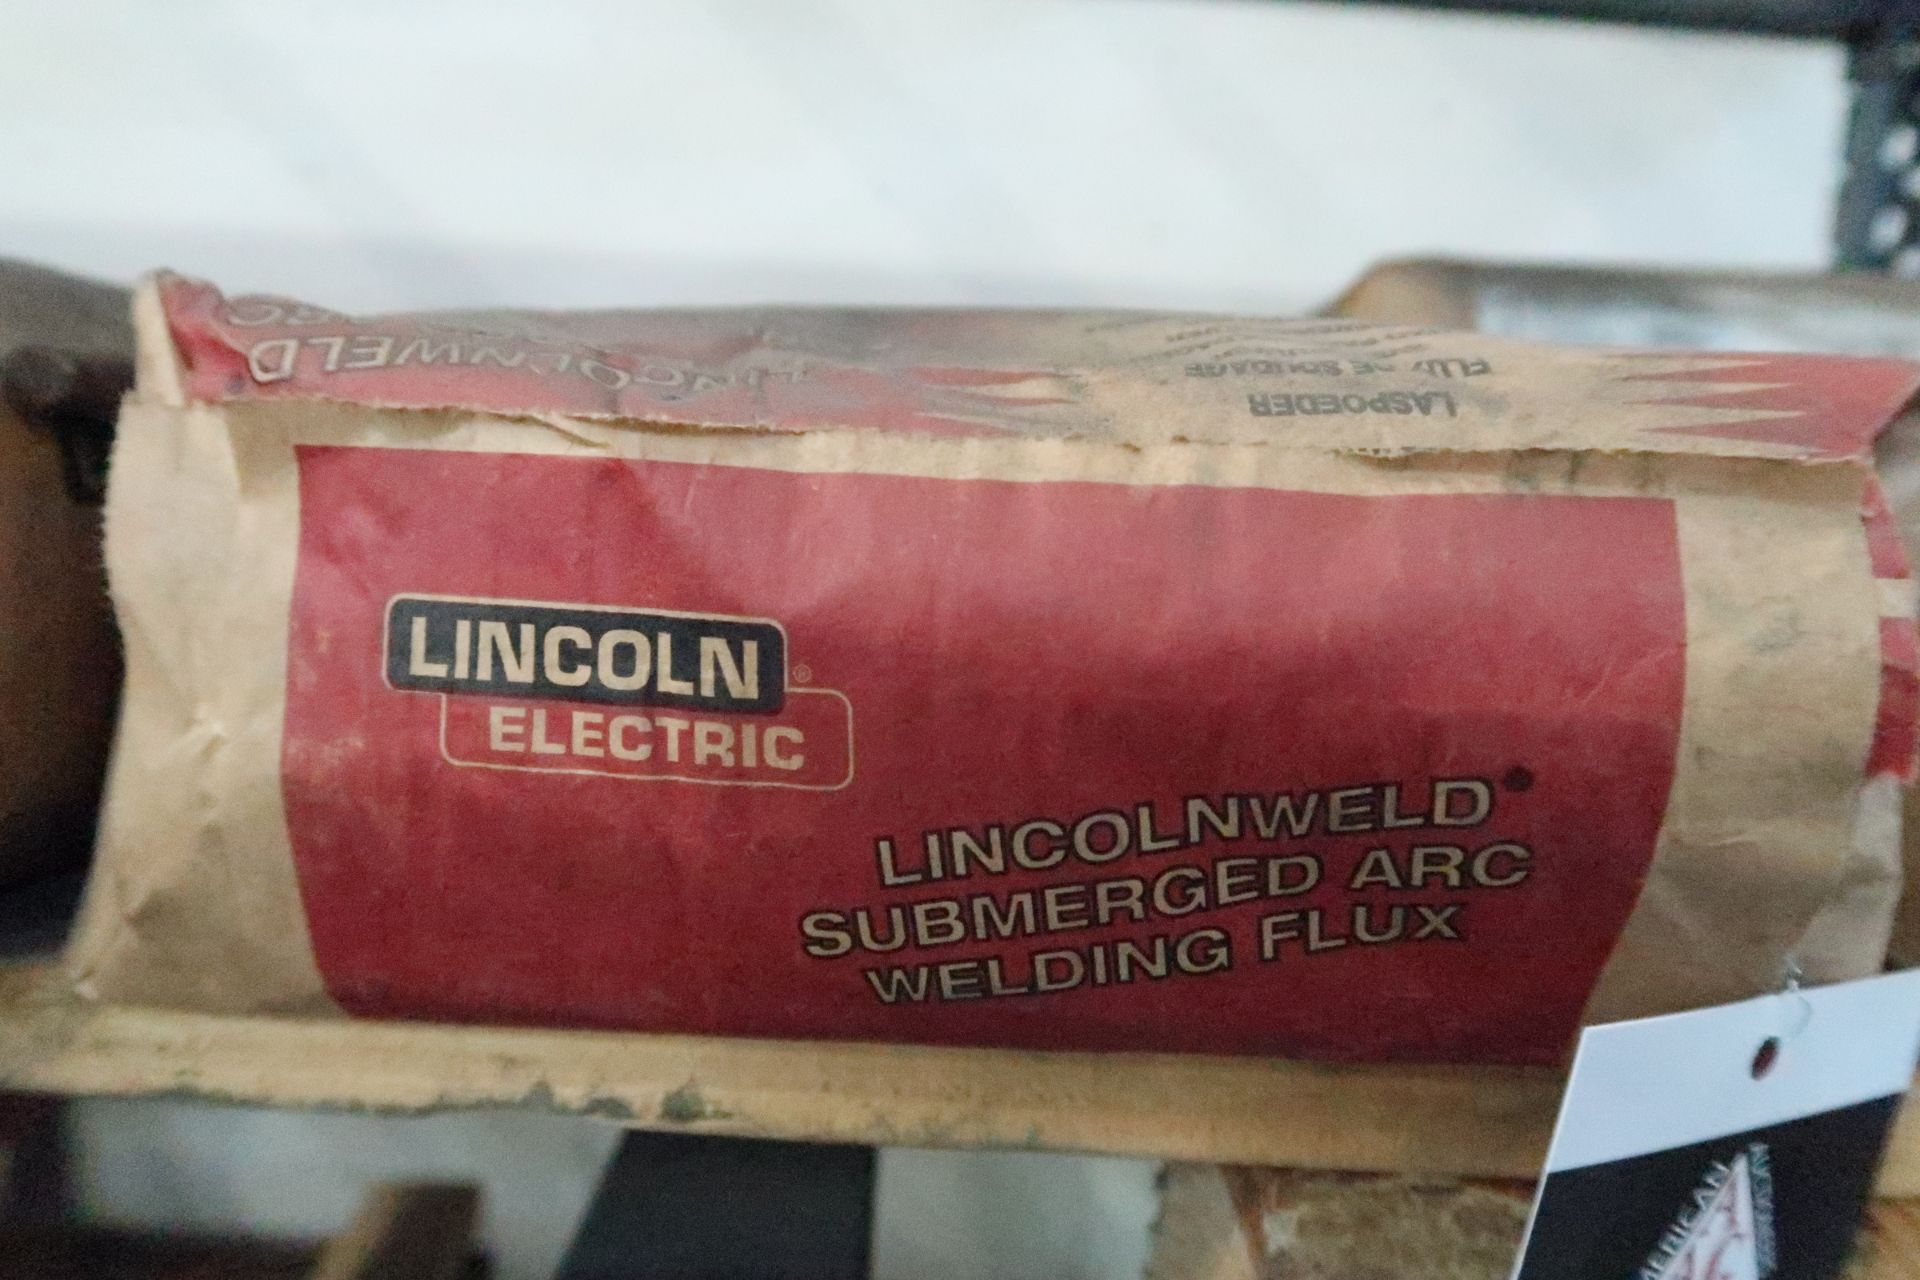 Welding Flux Lincolnweld Submerged Ark Flux (SOLD AS-IS - NO WARRANTY) - Image 7 of 10